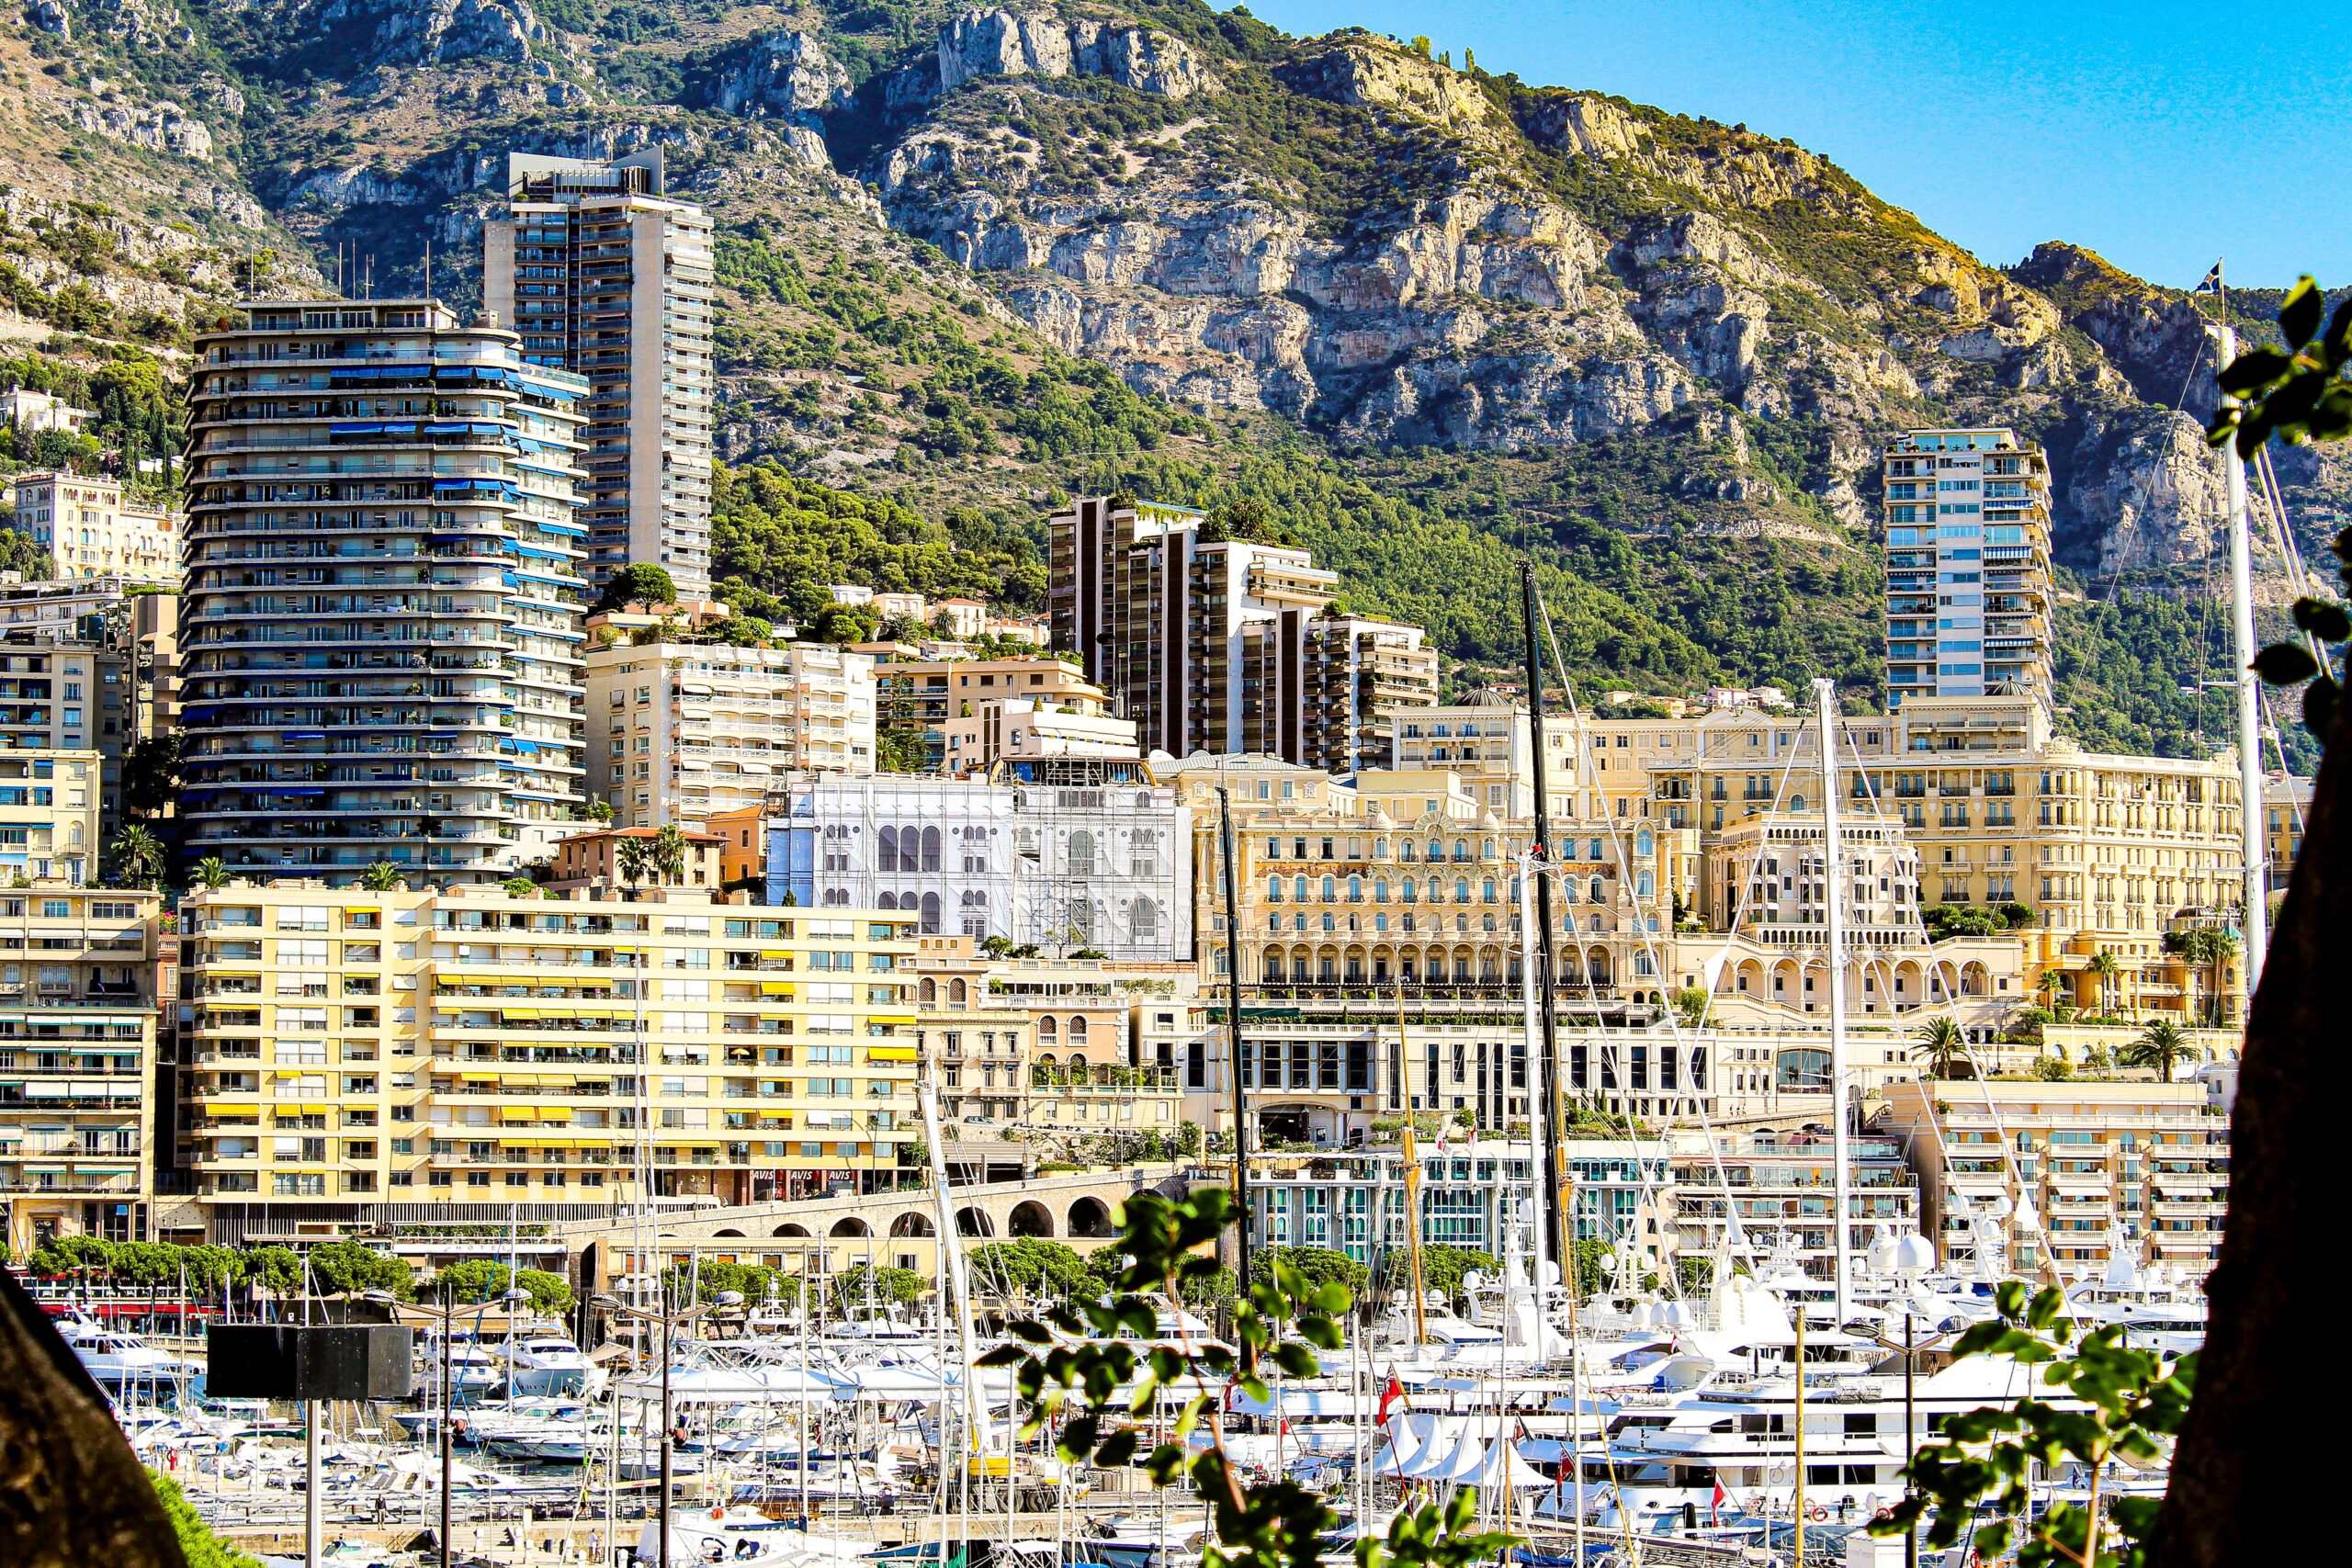 yachts in bay, high rise buildings agains mountain in a day in monaco